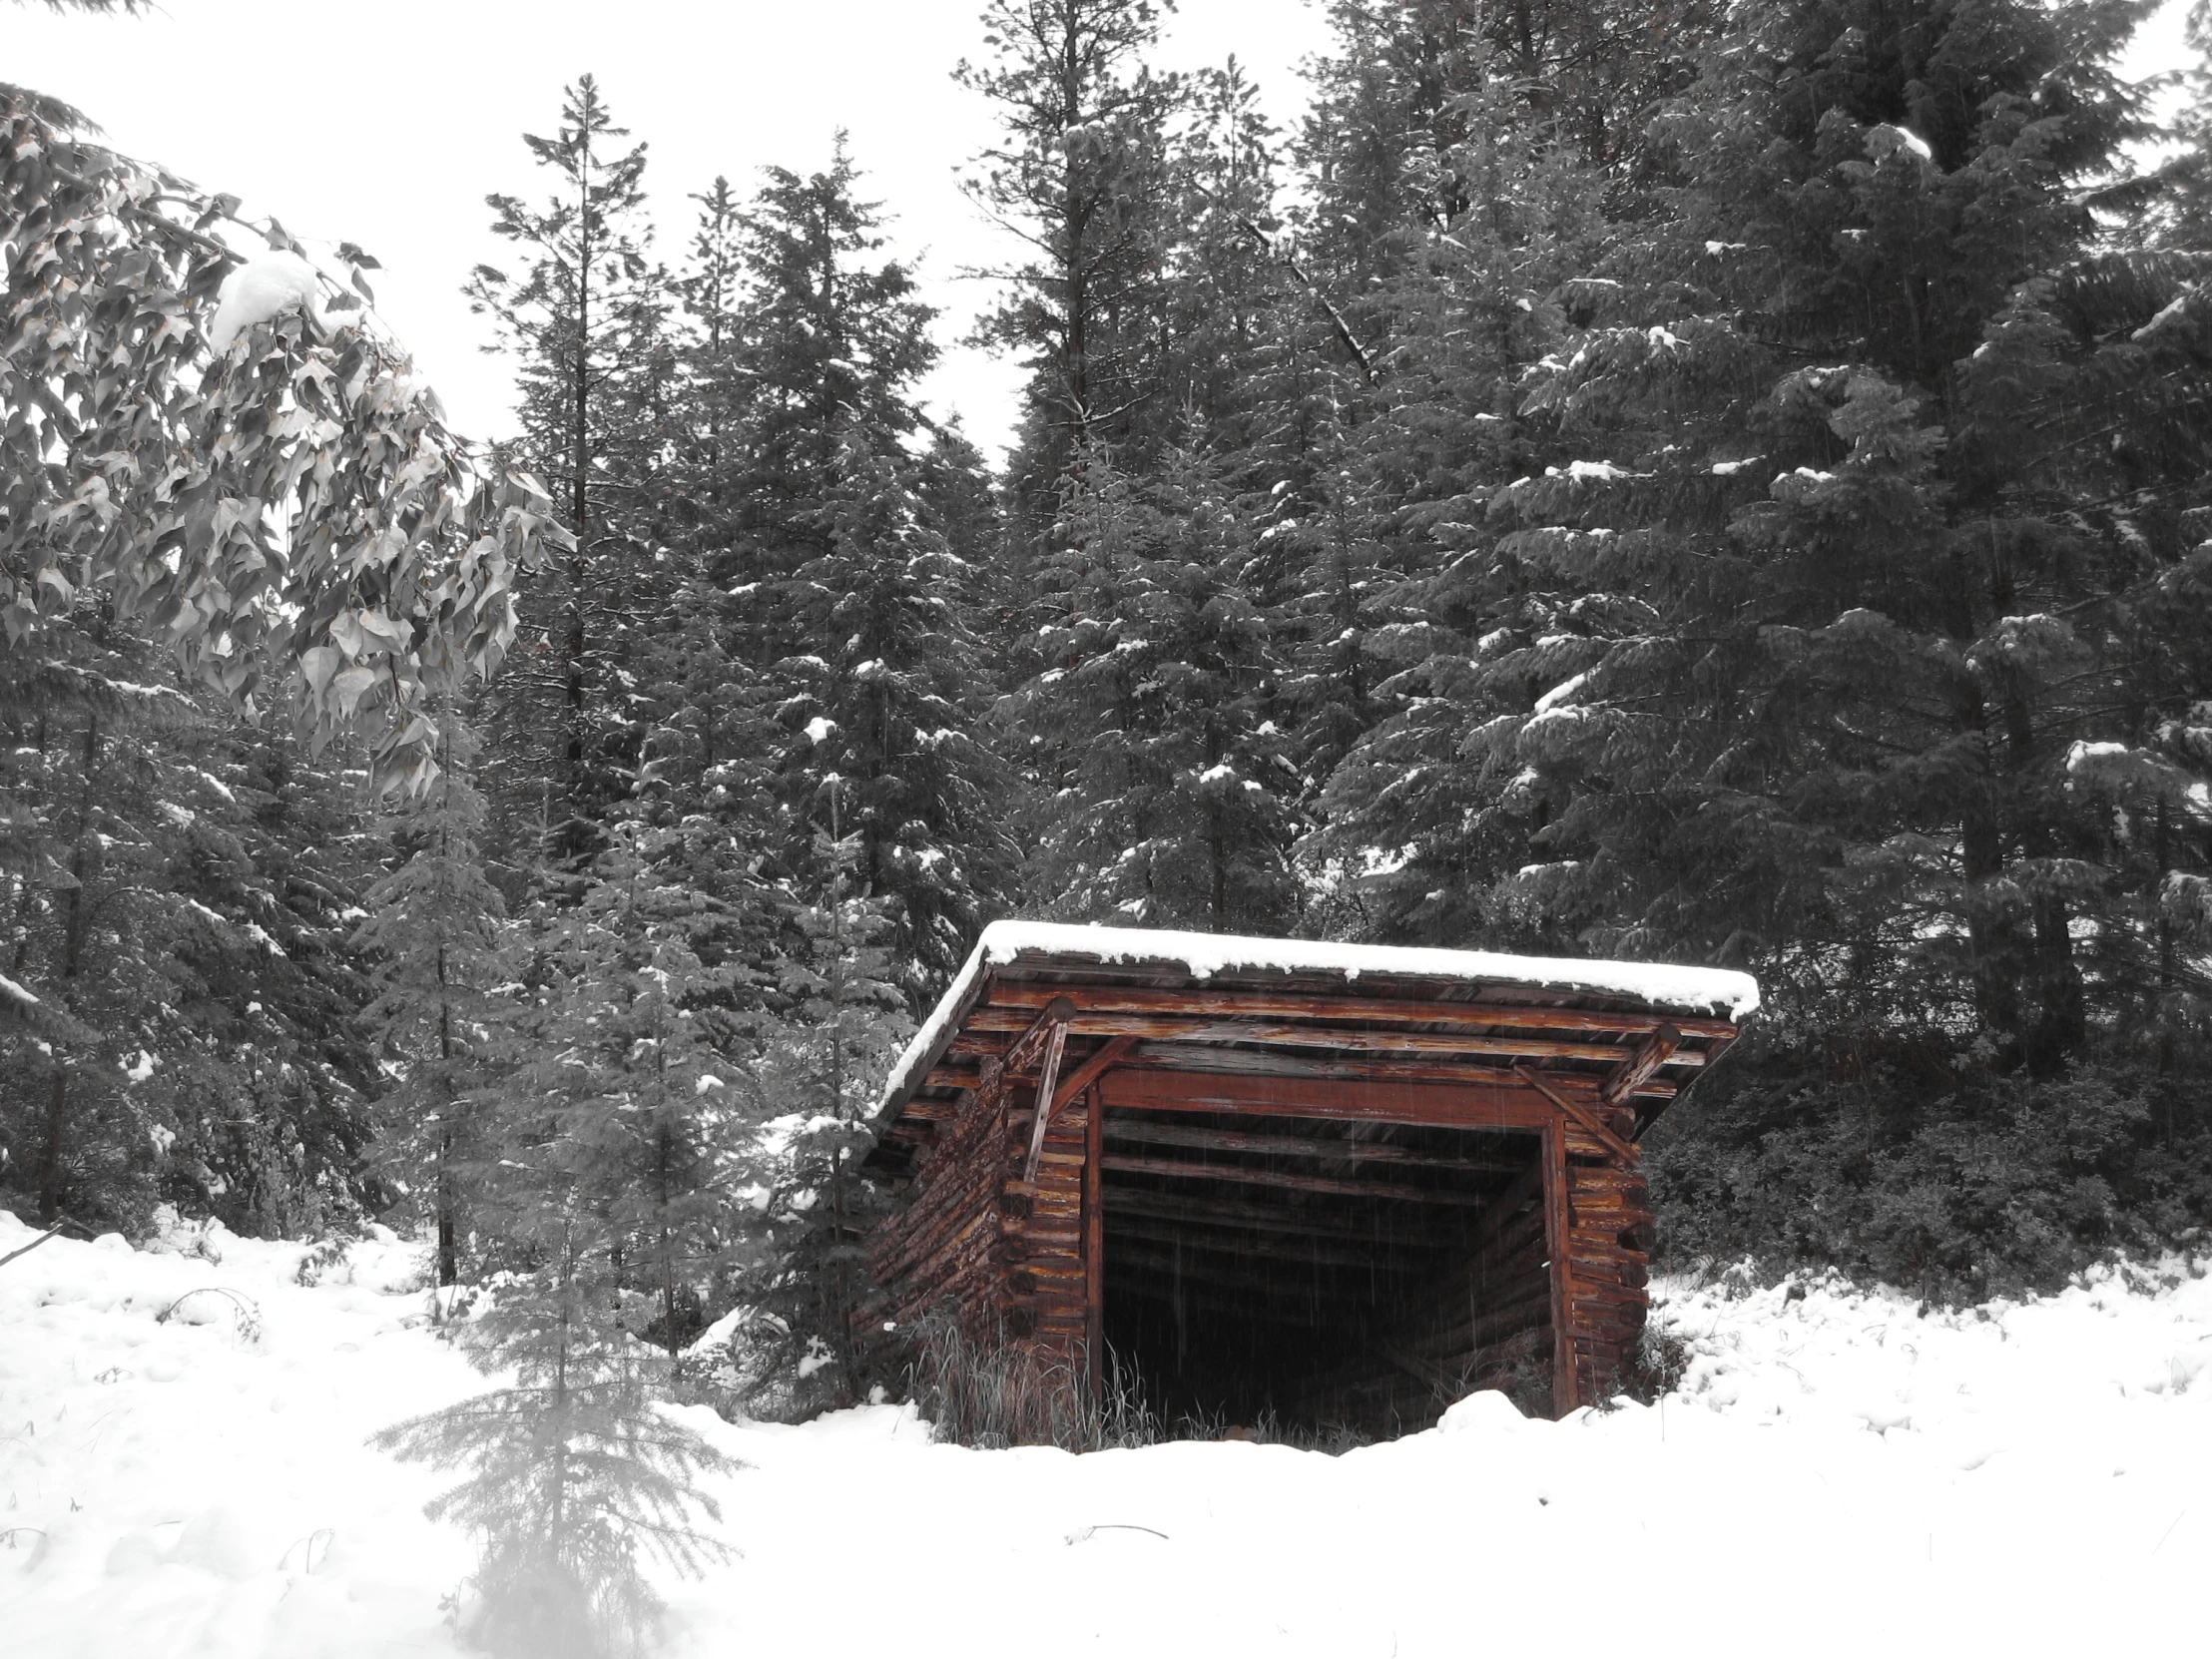 a covered in snow area that looks like an old shed